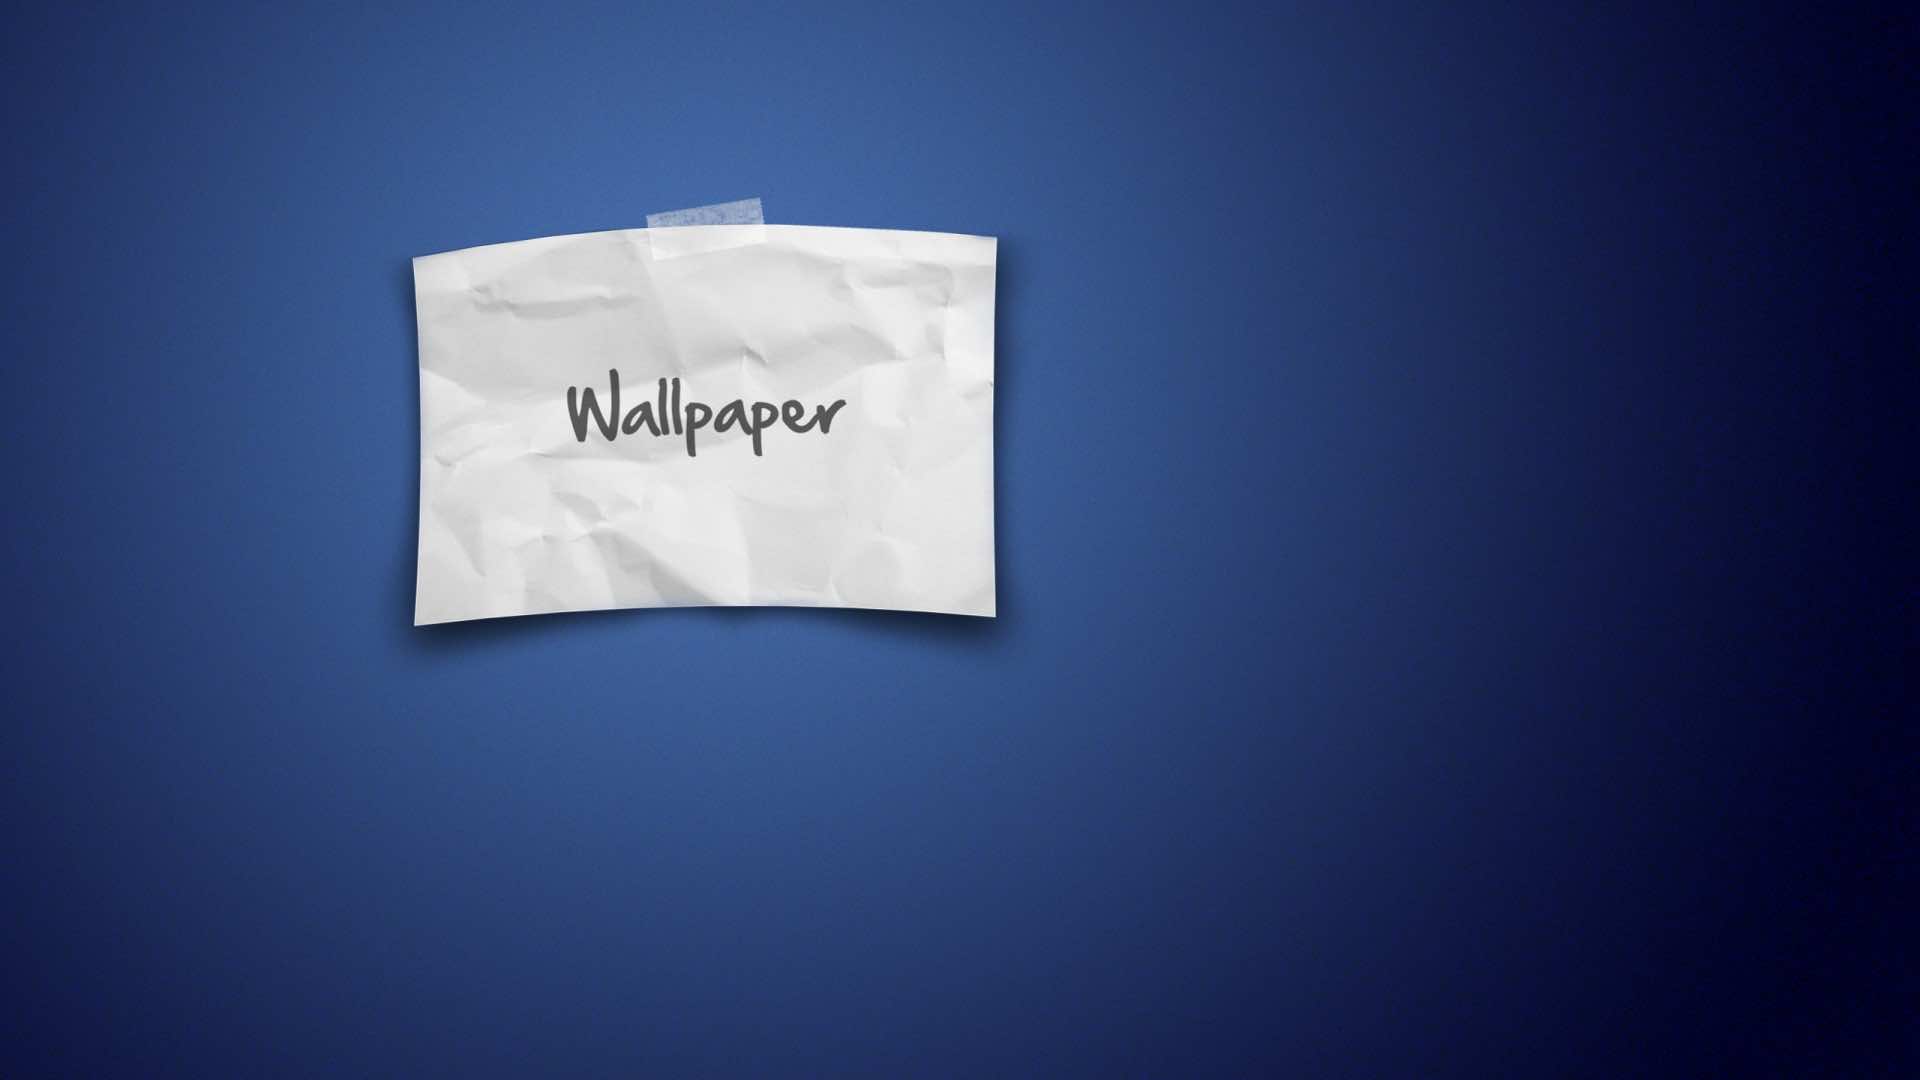 30 No Wallpaper Backgrounds For Free Download In Hd